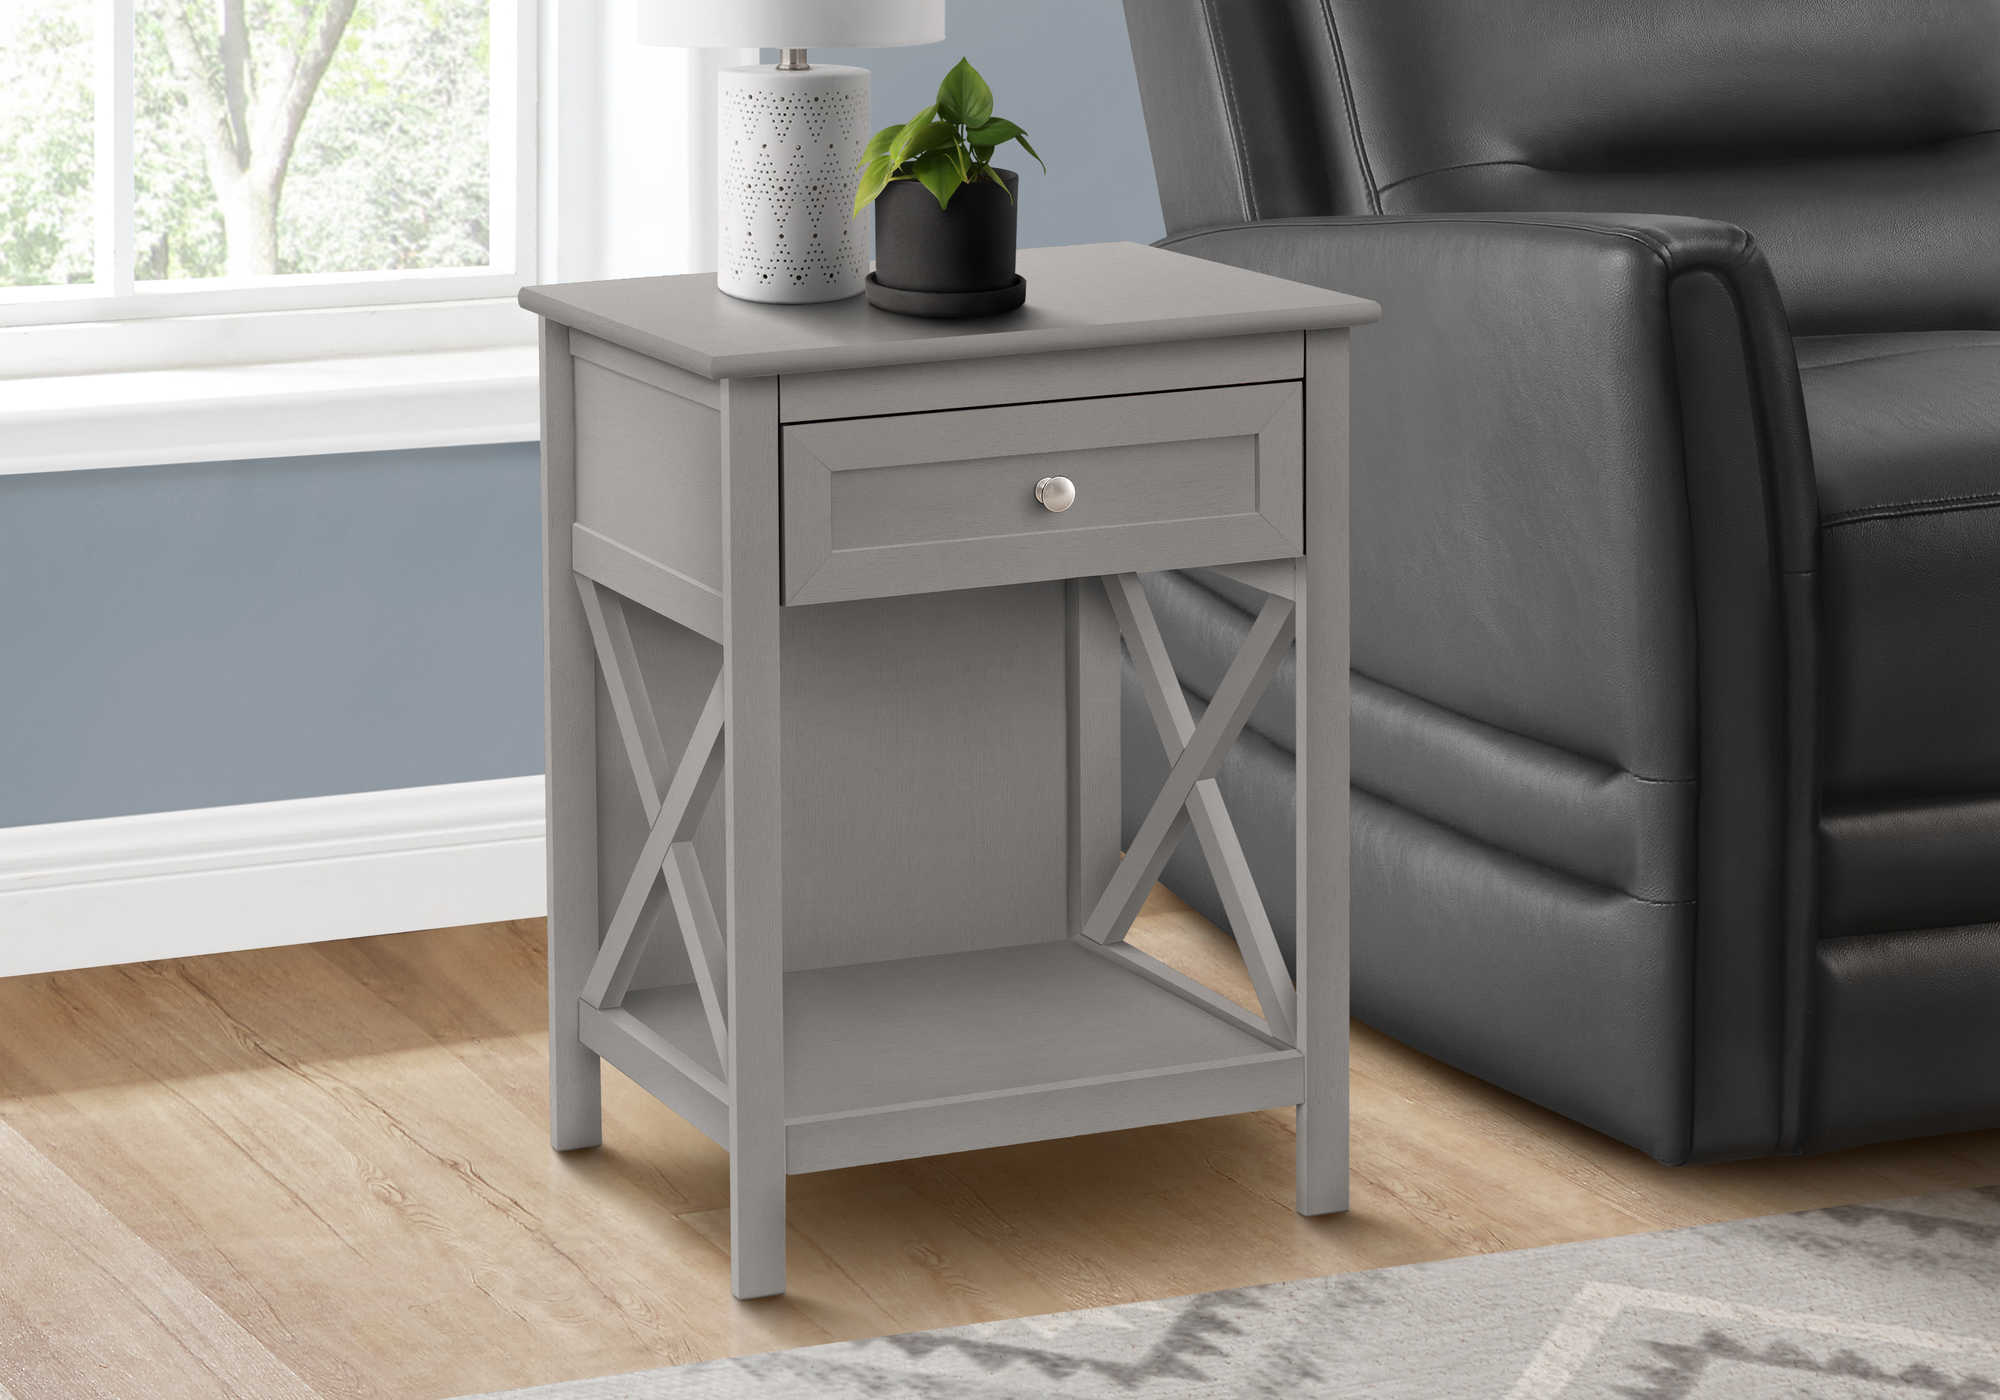 ACCENT TABLE - 25"H / ANTIQUE GREY VENEER END TABLE